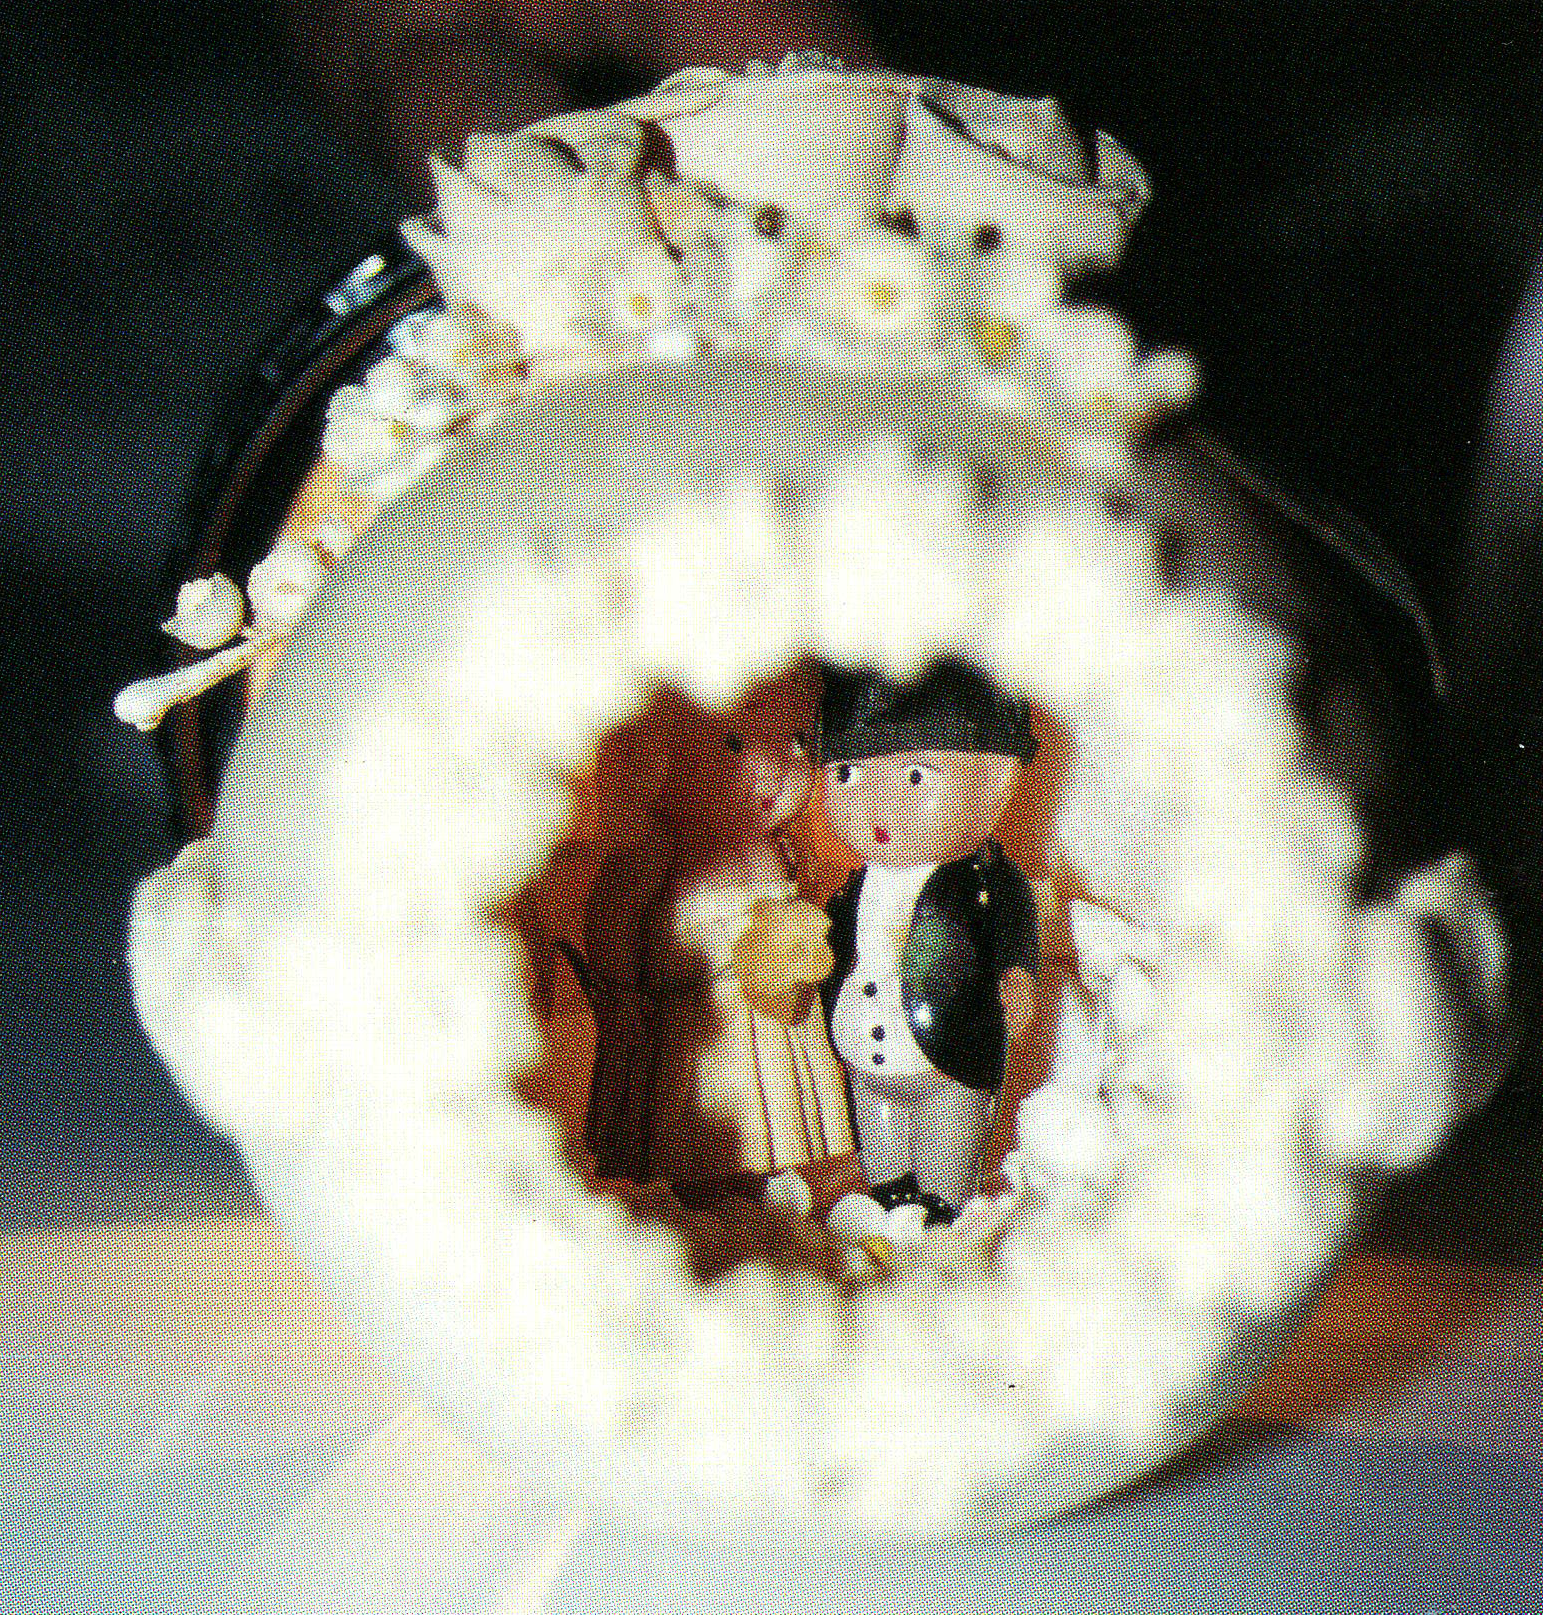 Childlike bride and groom figures inside a sugar egg with flowers on top